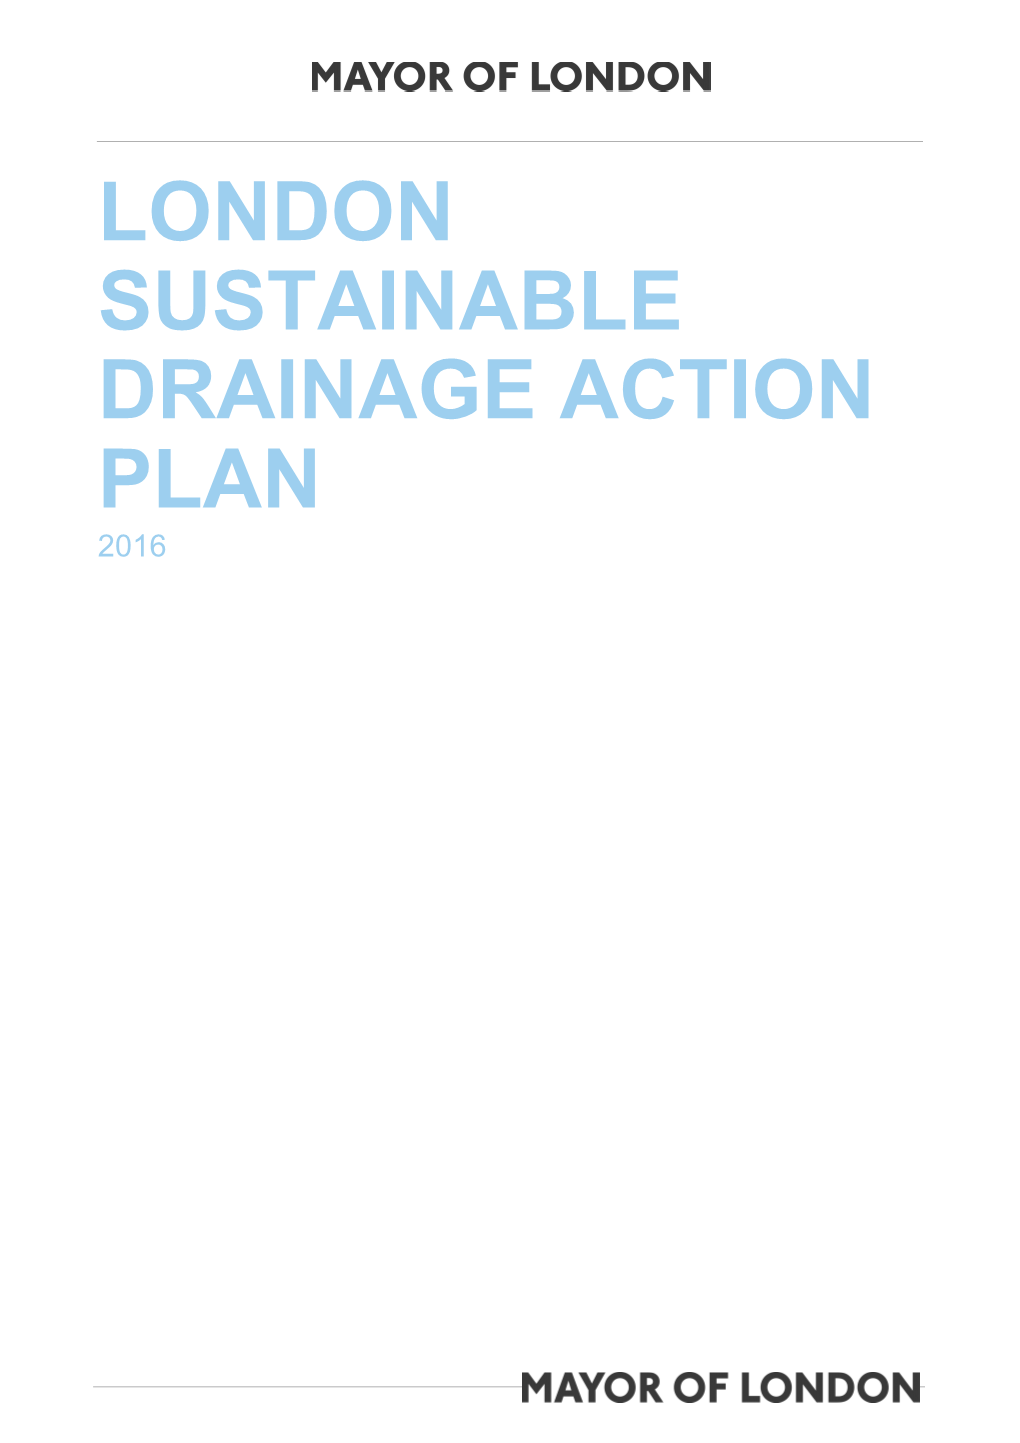 London Sustainable Drainage Action Plan 2016